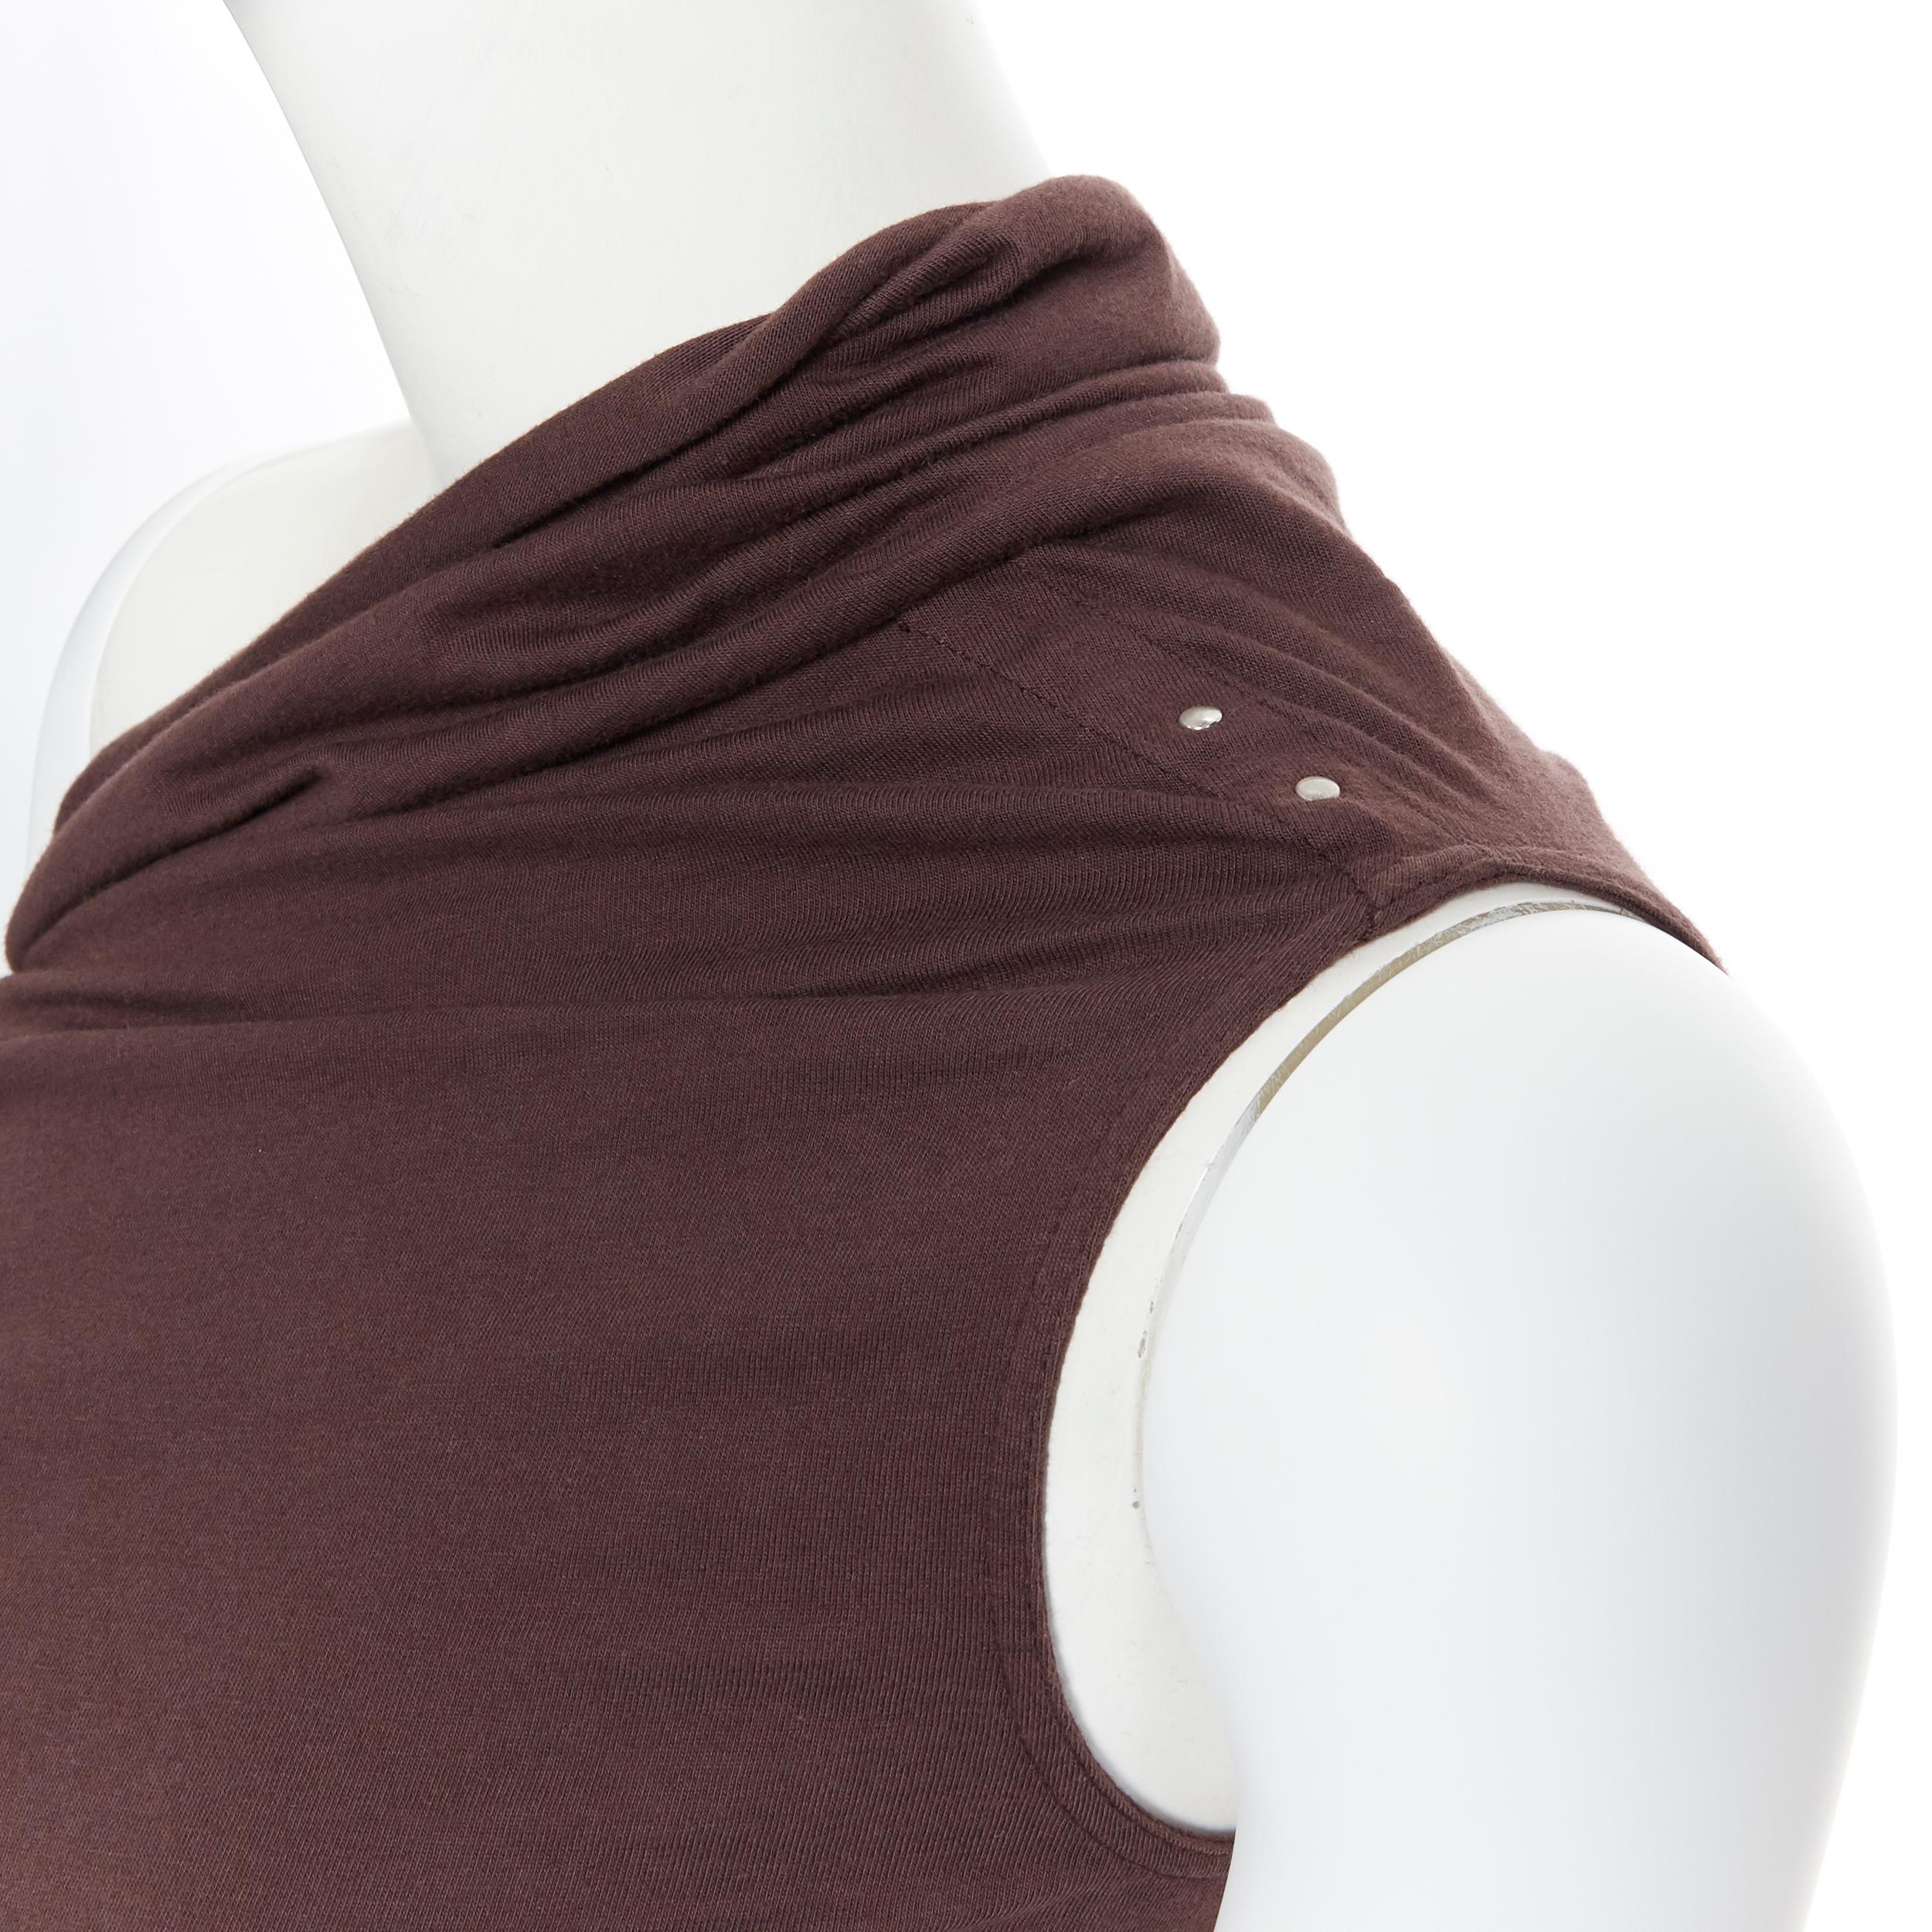 new RICK OWENS AW18 Sisyphus Runway raisin cotton studded one shoulder top IT38
Brand: Rick Owens
Designer: Rick Owens
Collection: AW18
Model Name / Style: One shoulder top
Material: Cotton
Color: Brown
Pattern: Solid
Extra Detail: Rusched neckline.